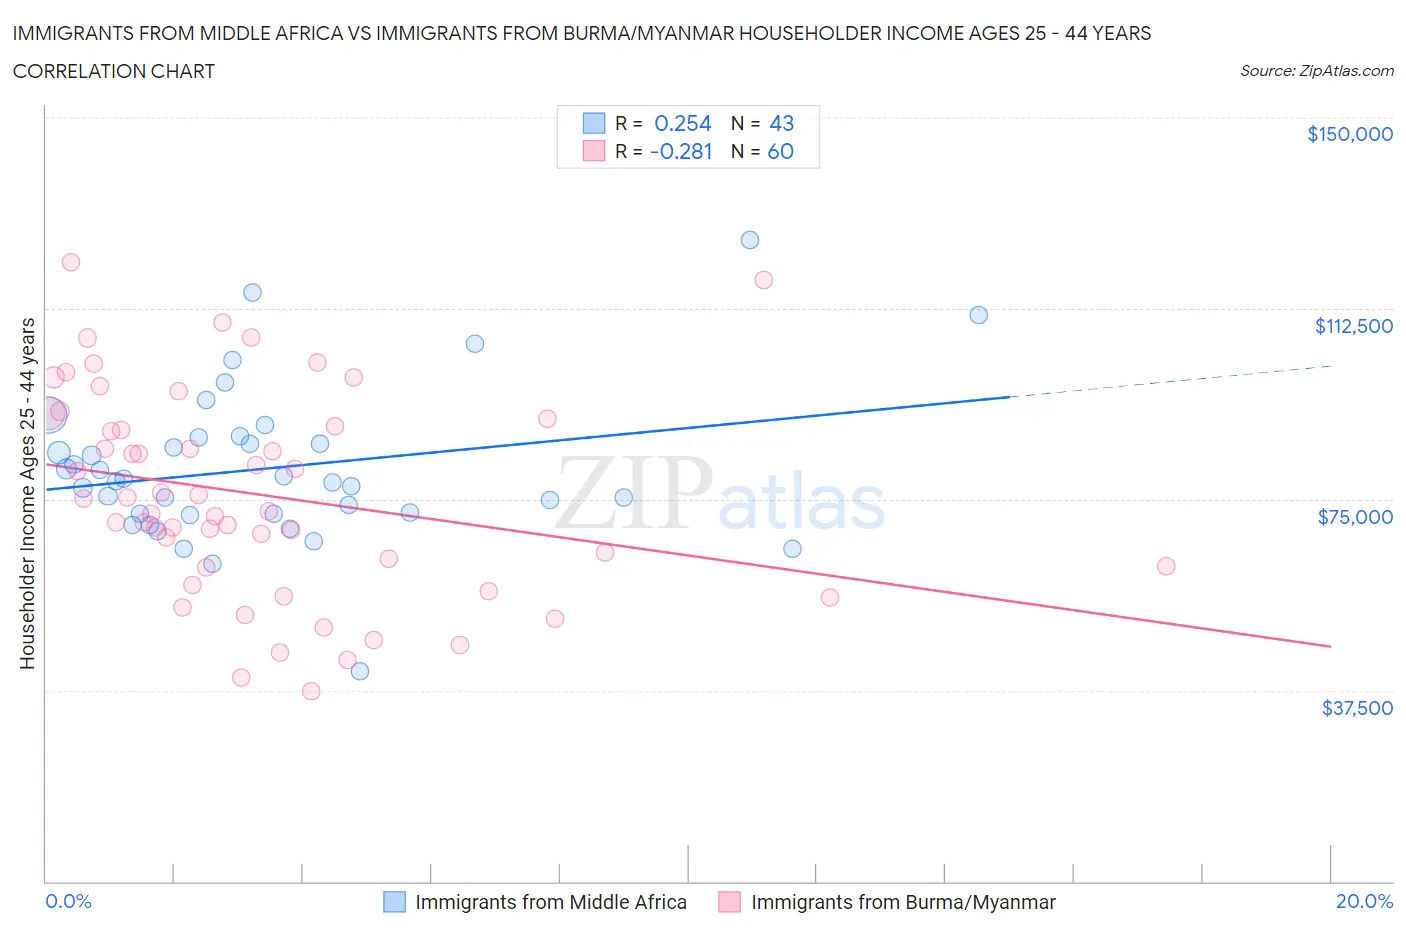 Immigrants from Middle Africa vs Immigrants from Burma/Myanmar Householder Income Ages 25 - 44 years